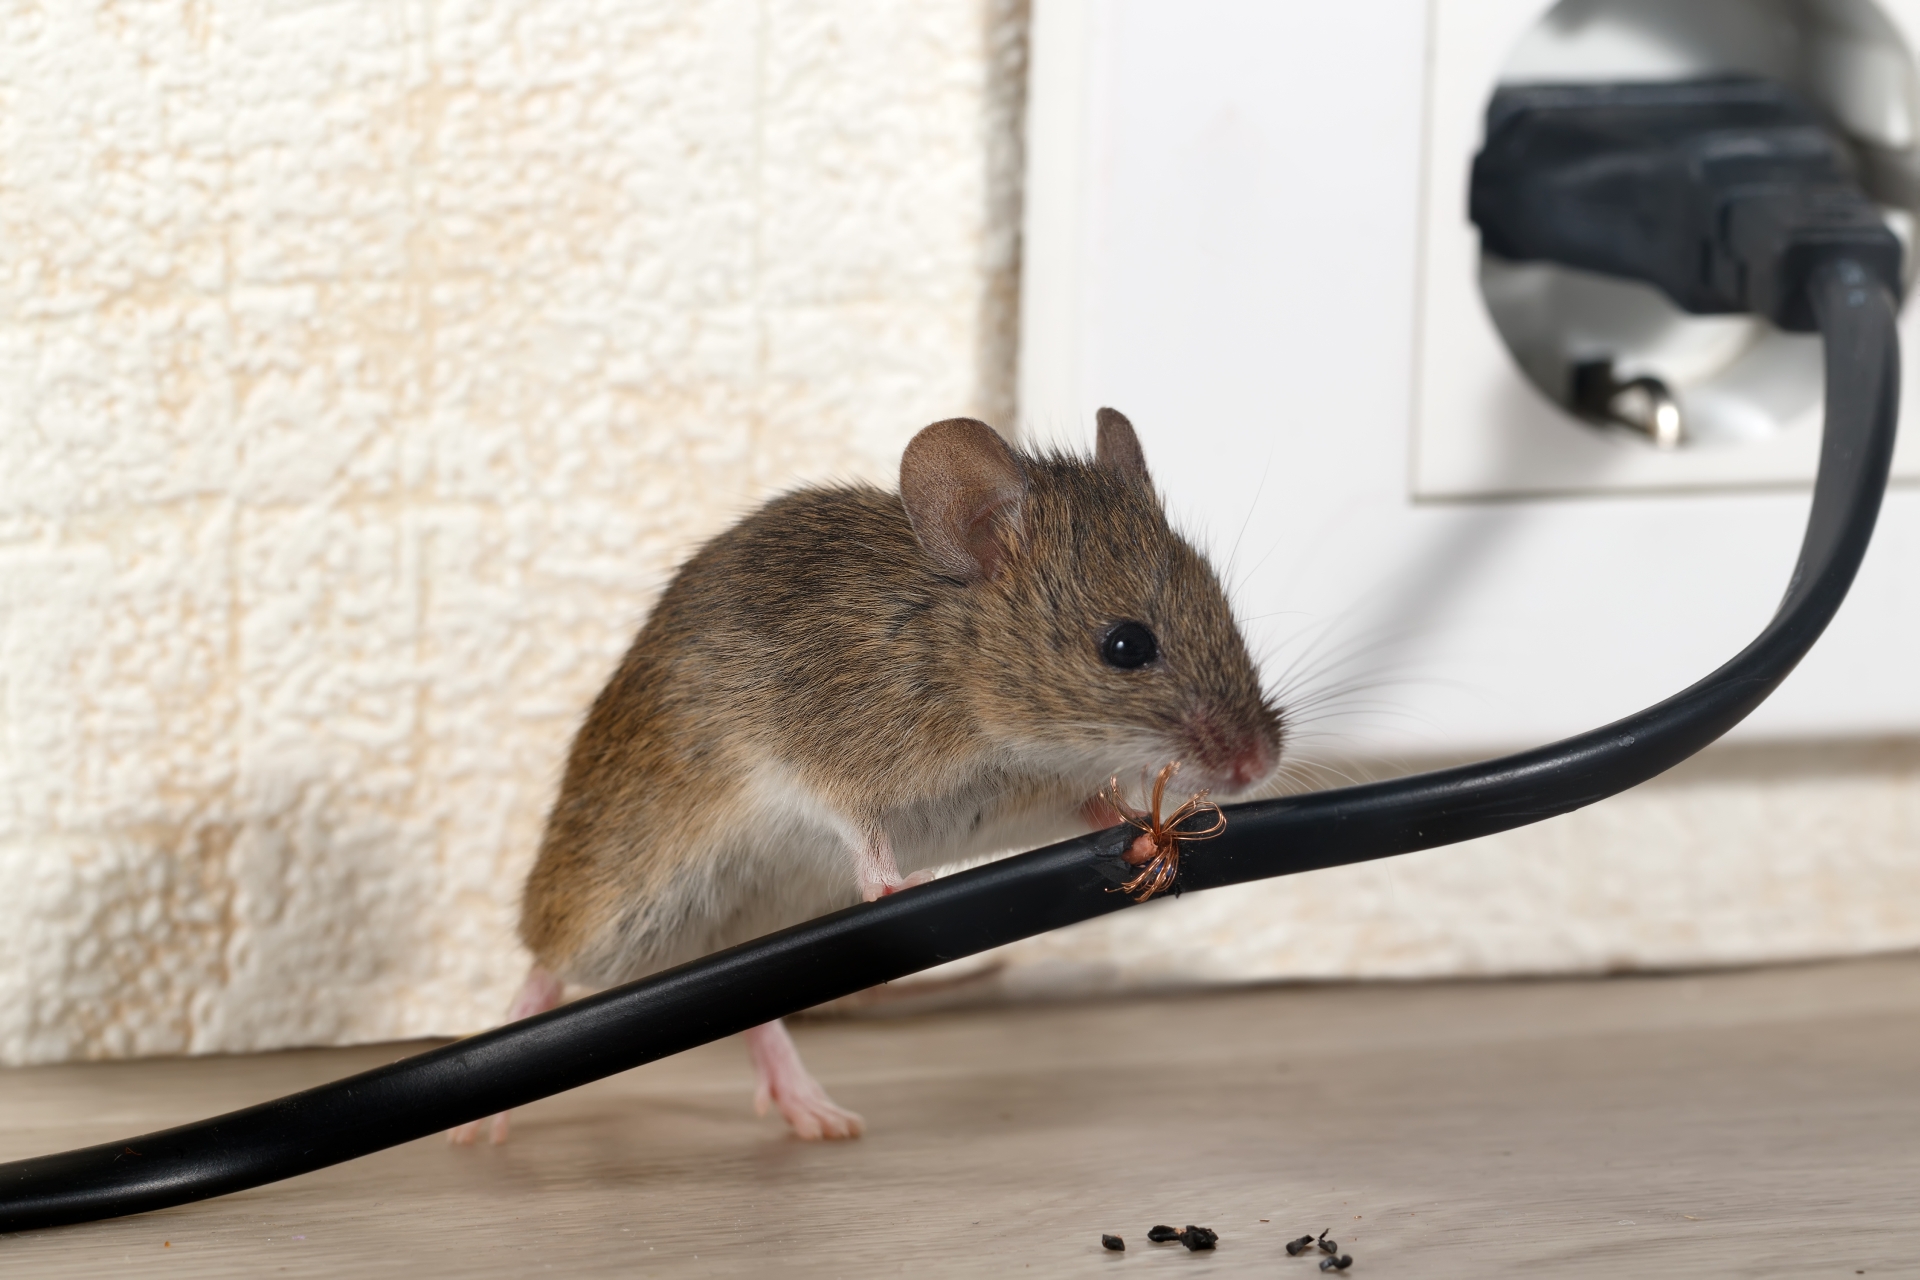 Mice Infestation, Pest Control in Lambeth, SE11. Call Now 020 8166 9746